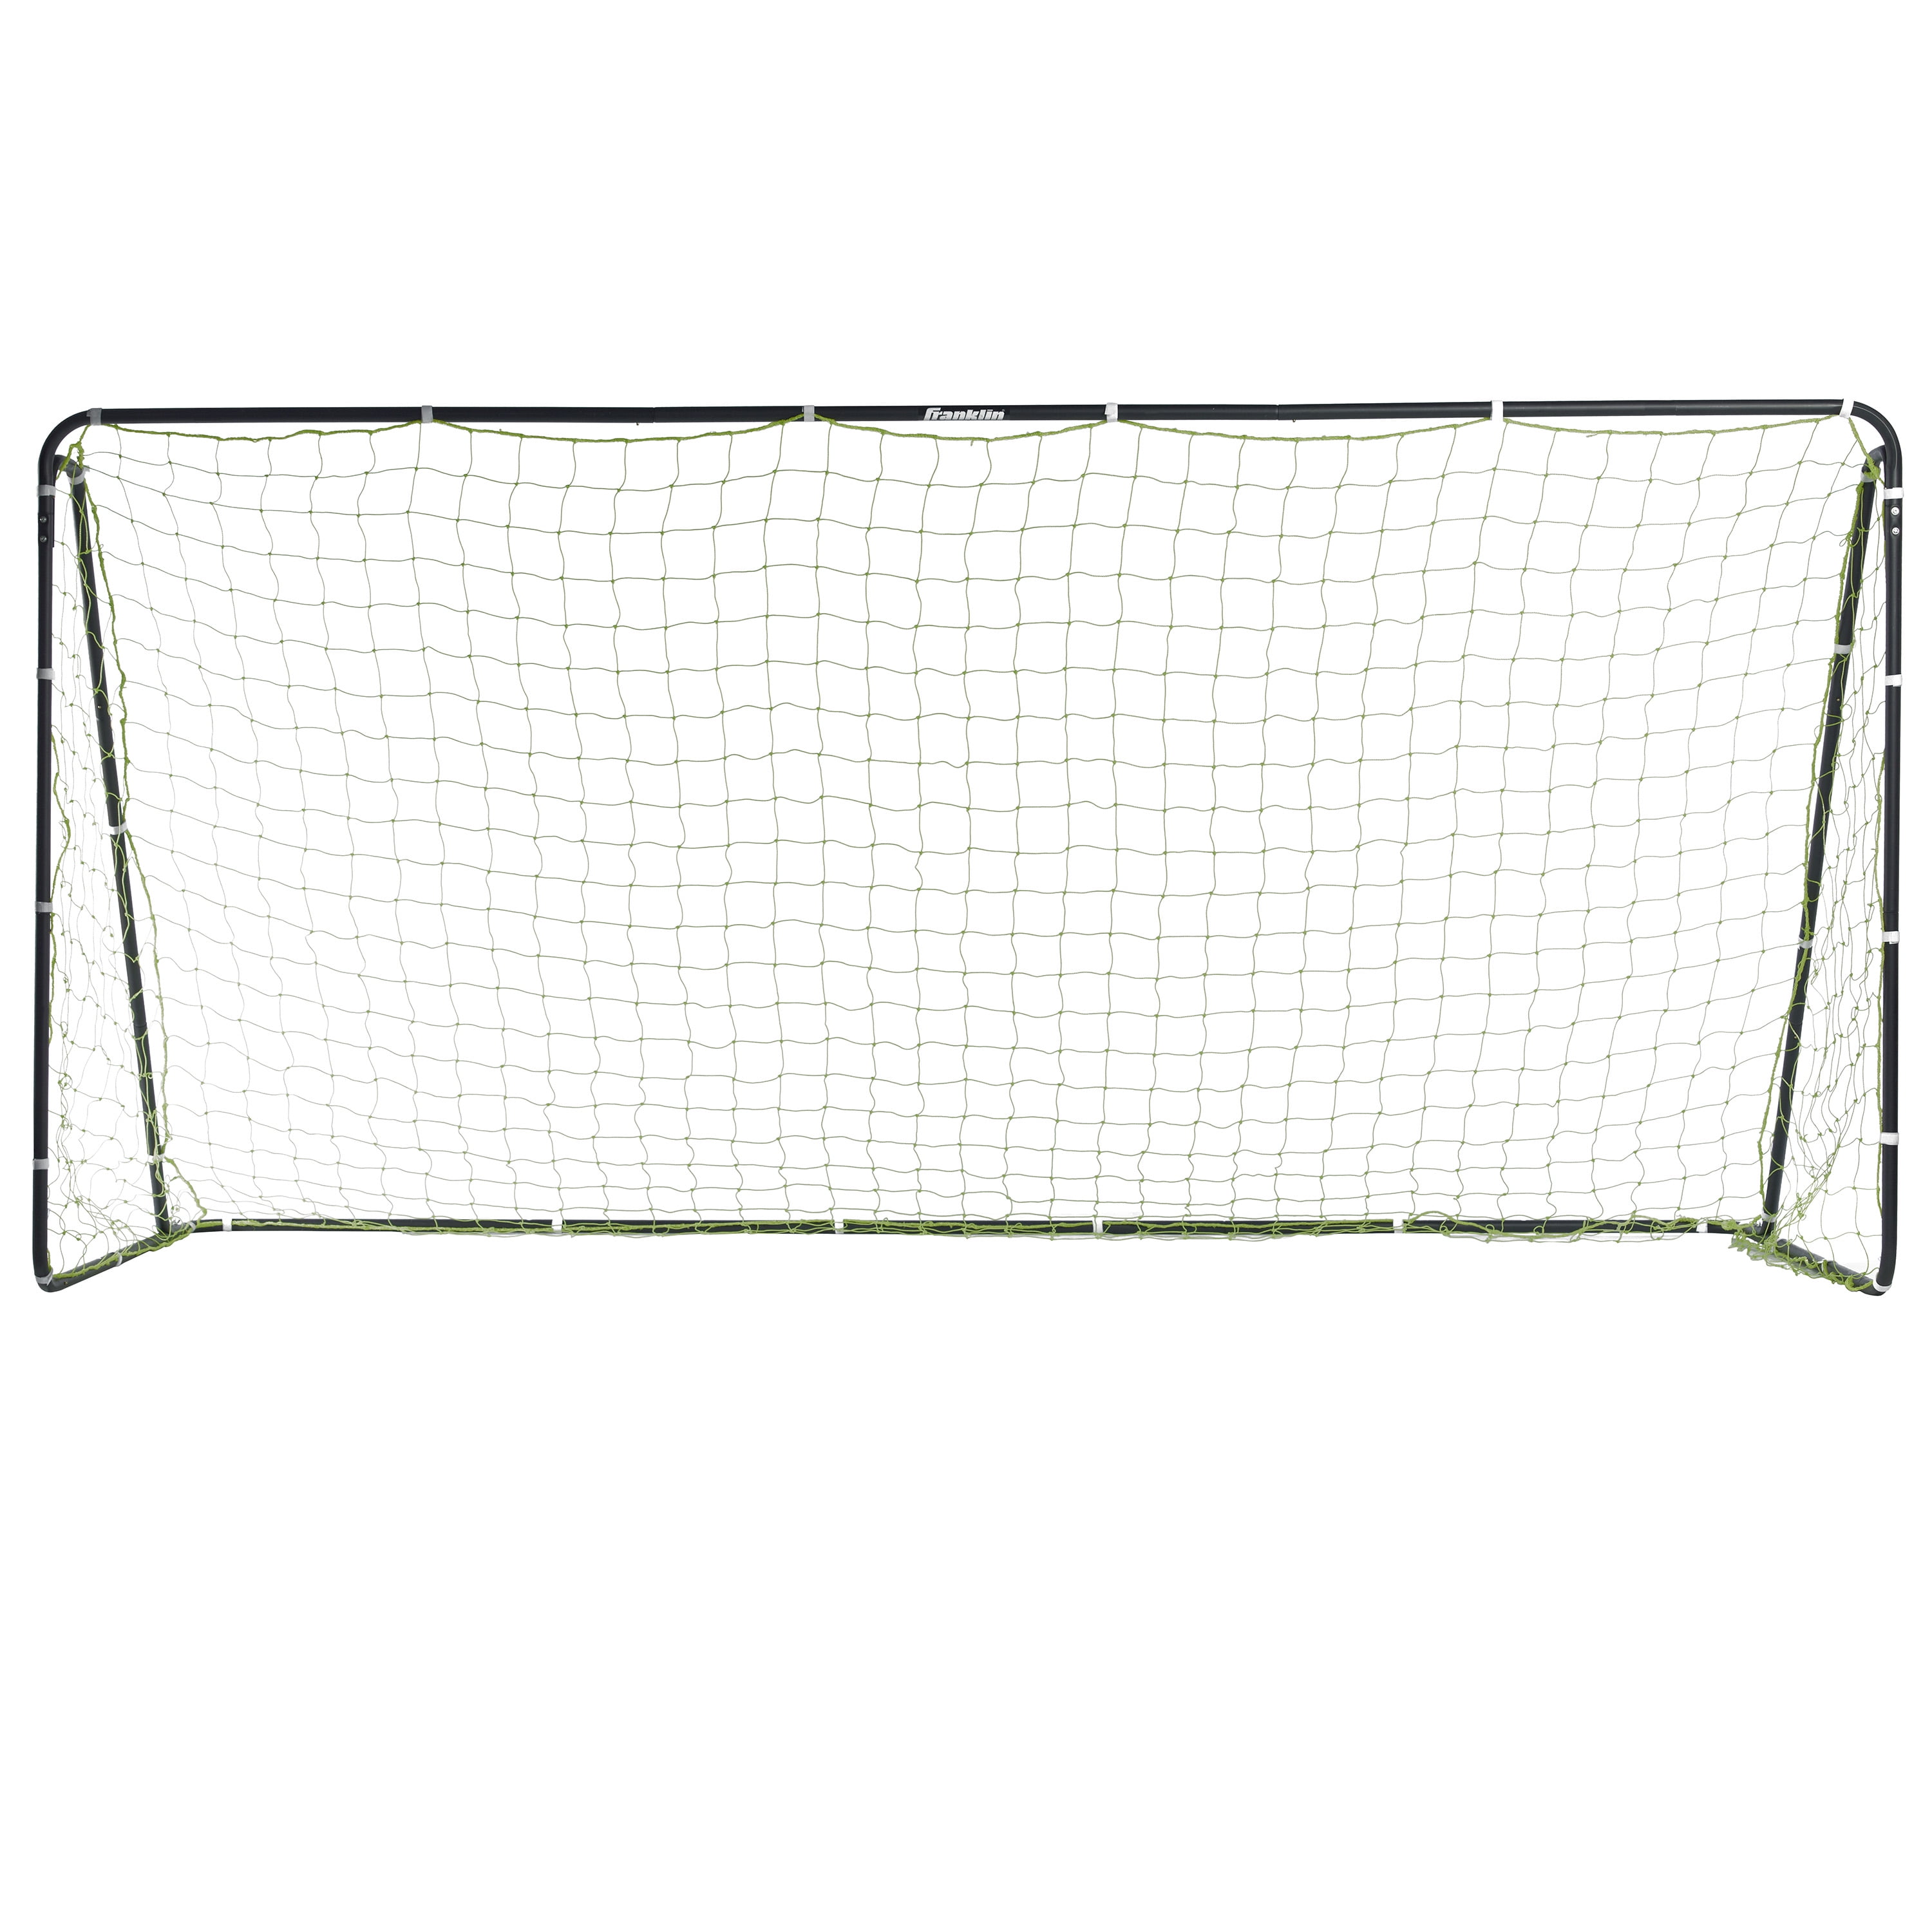 Franklin Sports Competition Soccer Goal 